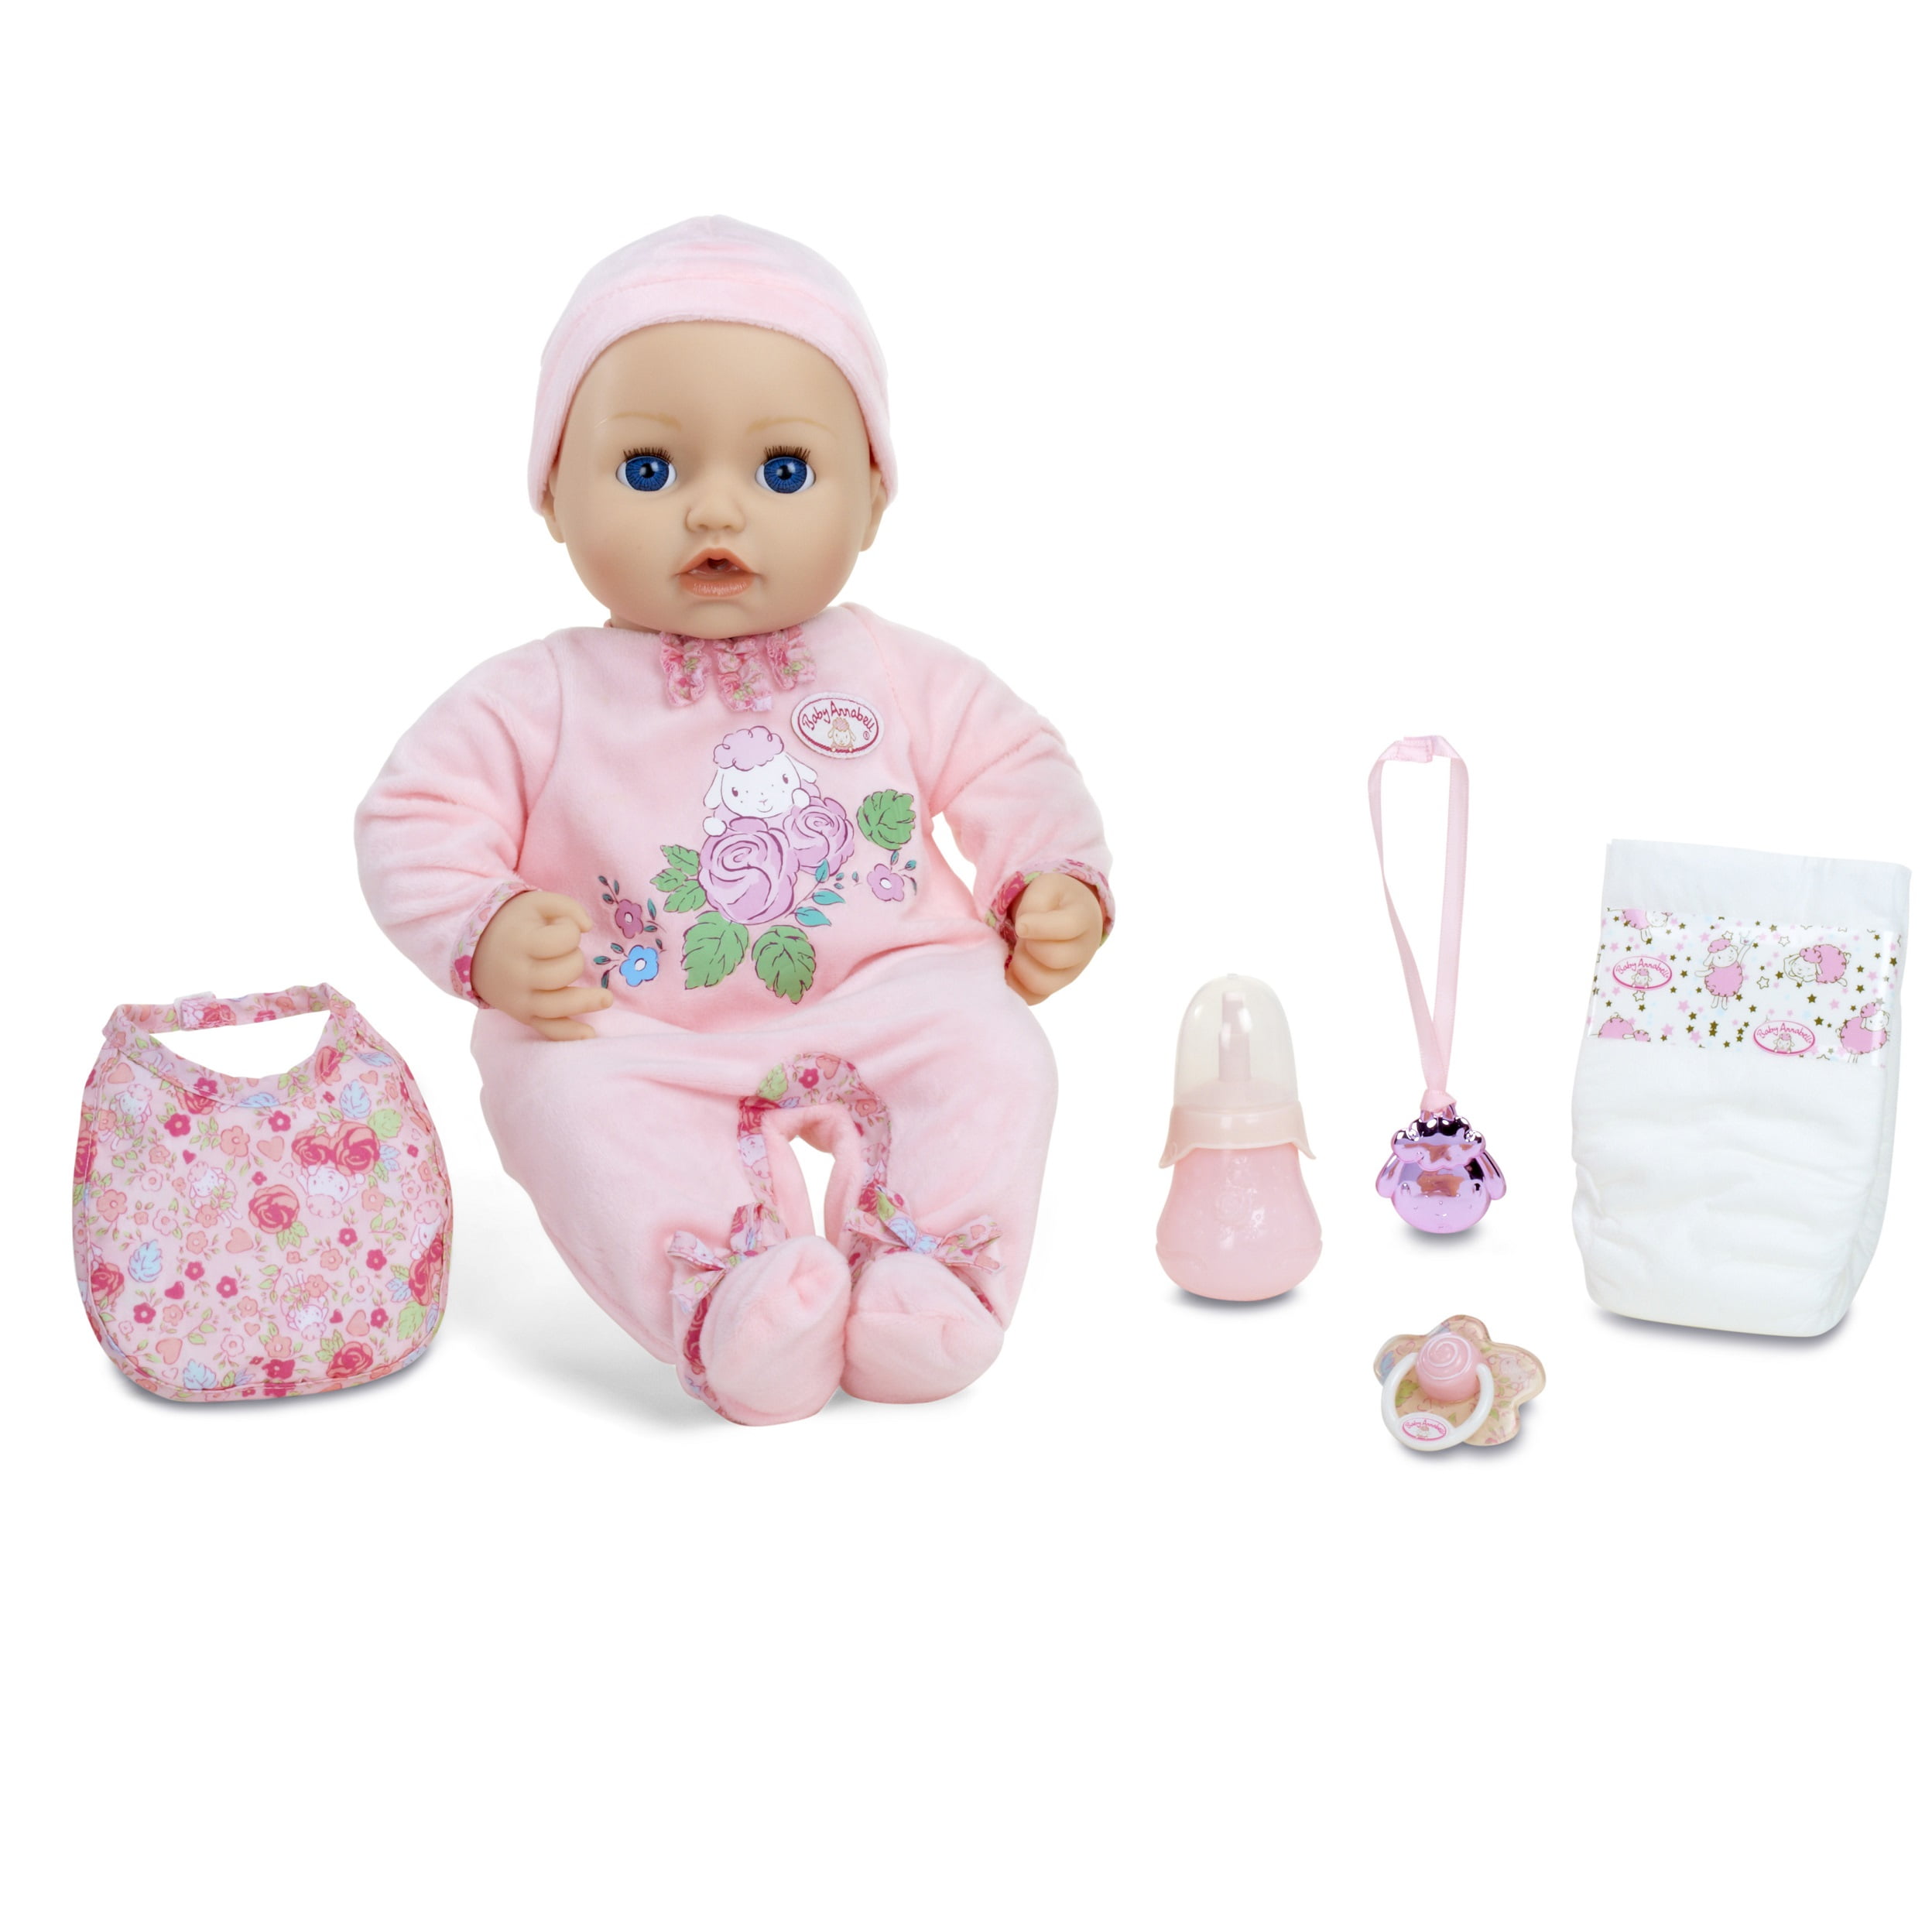 Details about   Baby Born Interactive Baby Doll Blue Eyes Very Hard To Find! 